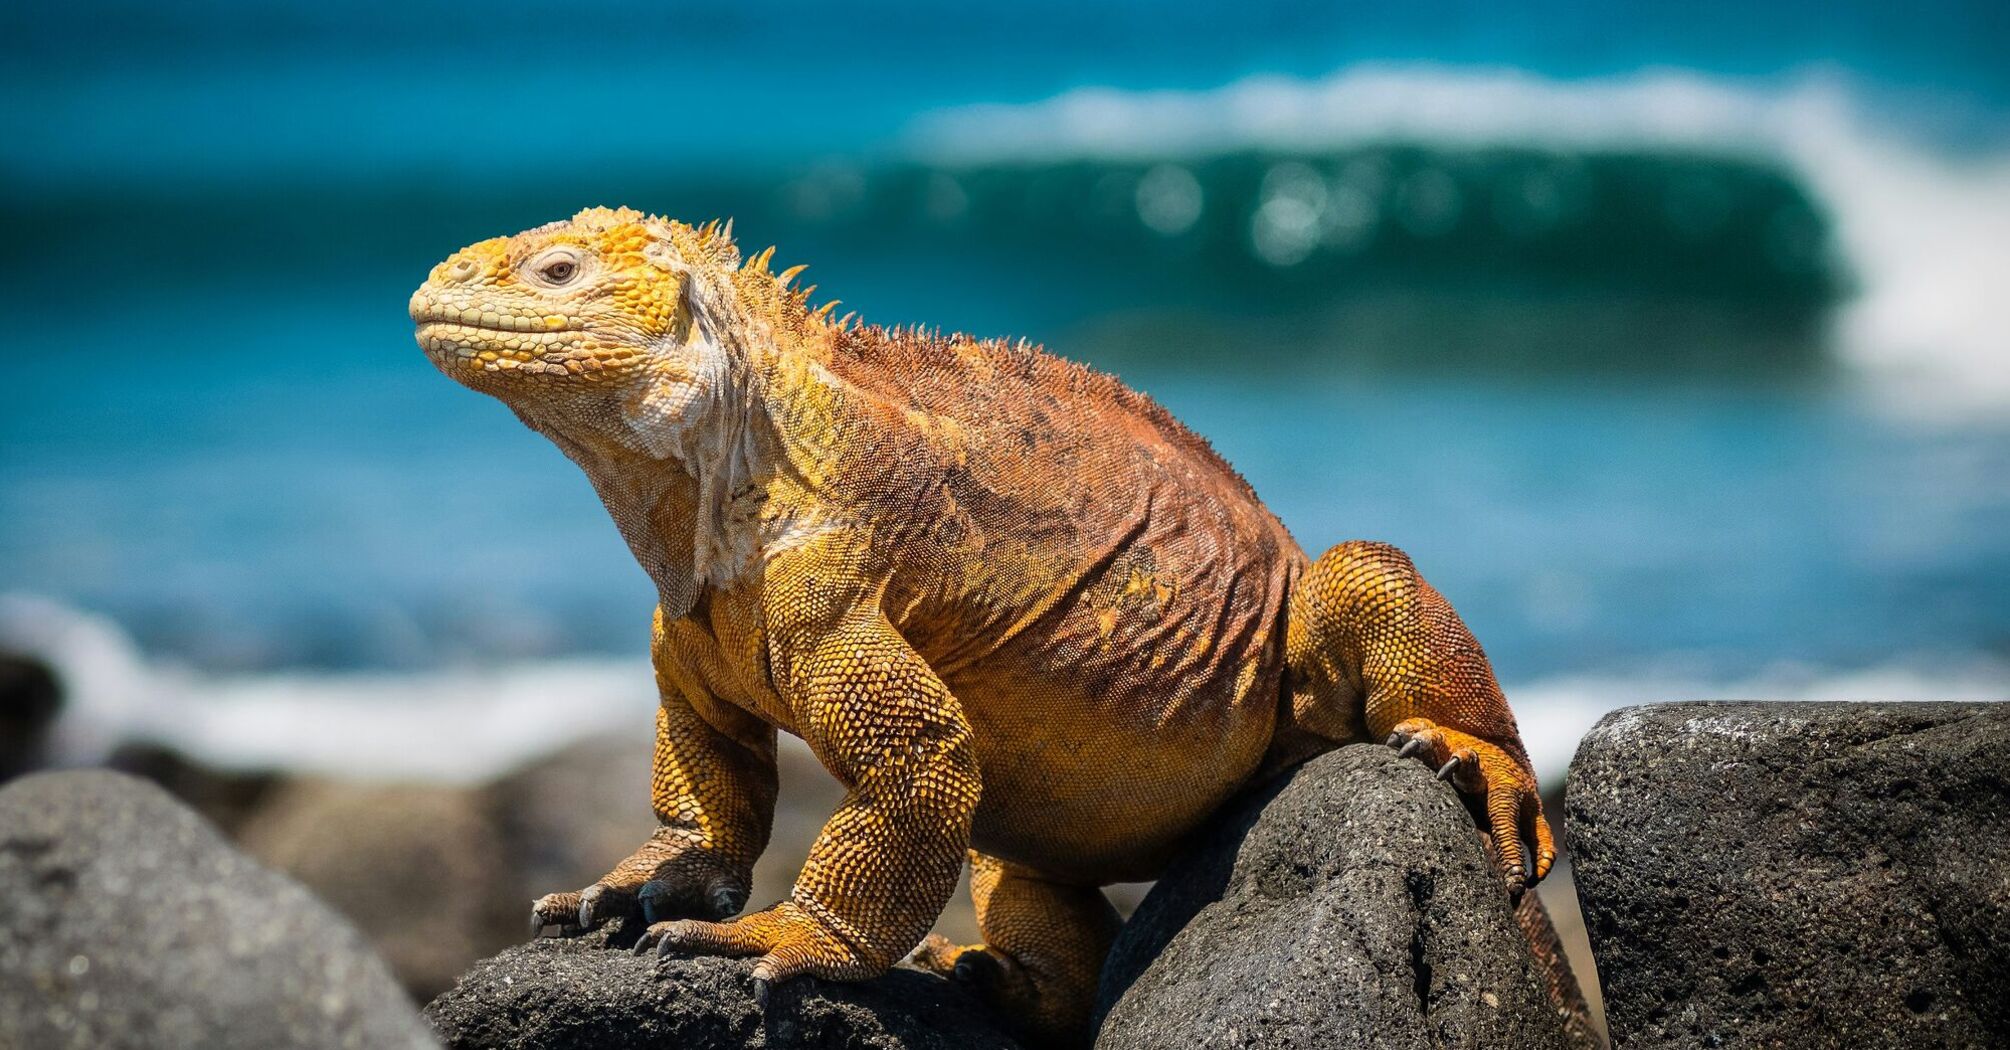 An iguana warms itself up in the sun on rocky terrain with the ocean in the background